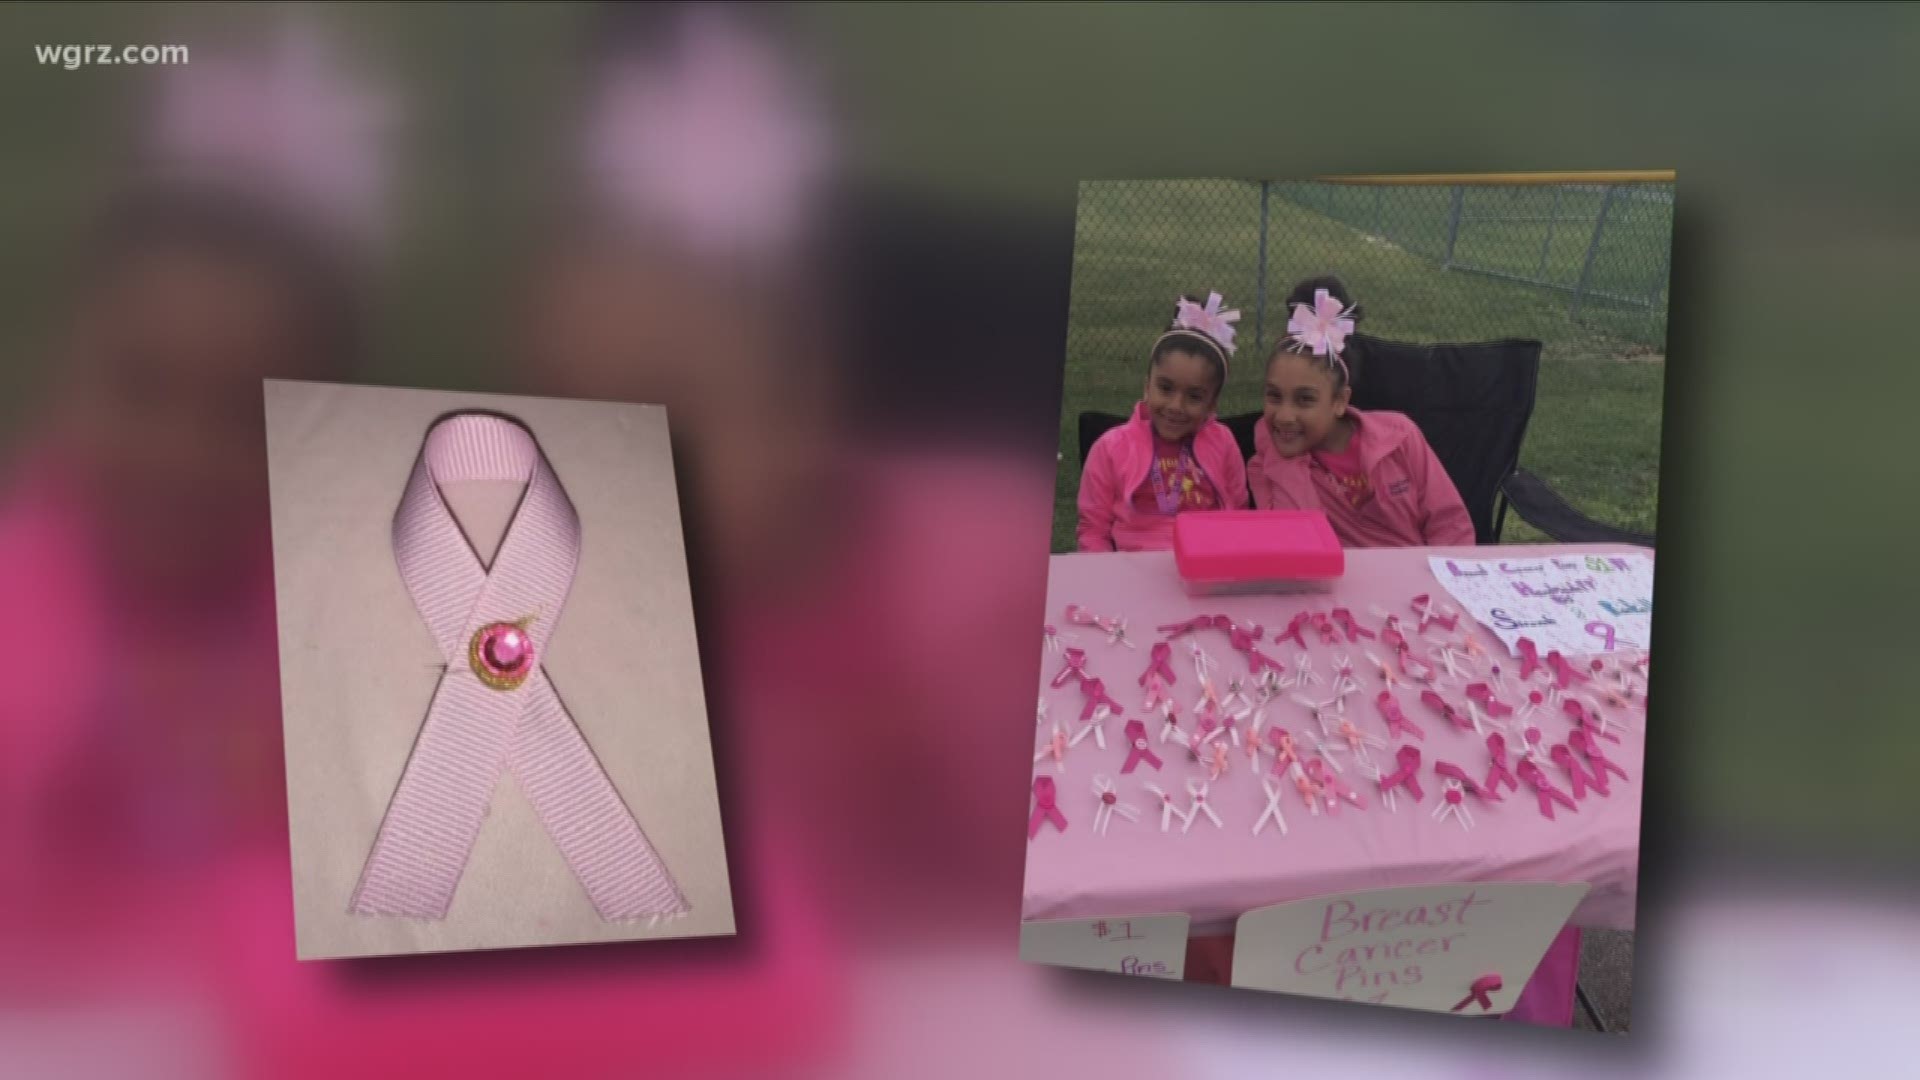 Two young sisters from Lackawanna are celebrated tonight with an award from the New York State Senate for raising money and awareness about breast cancer.